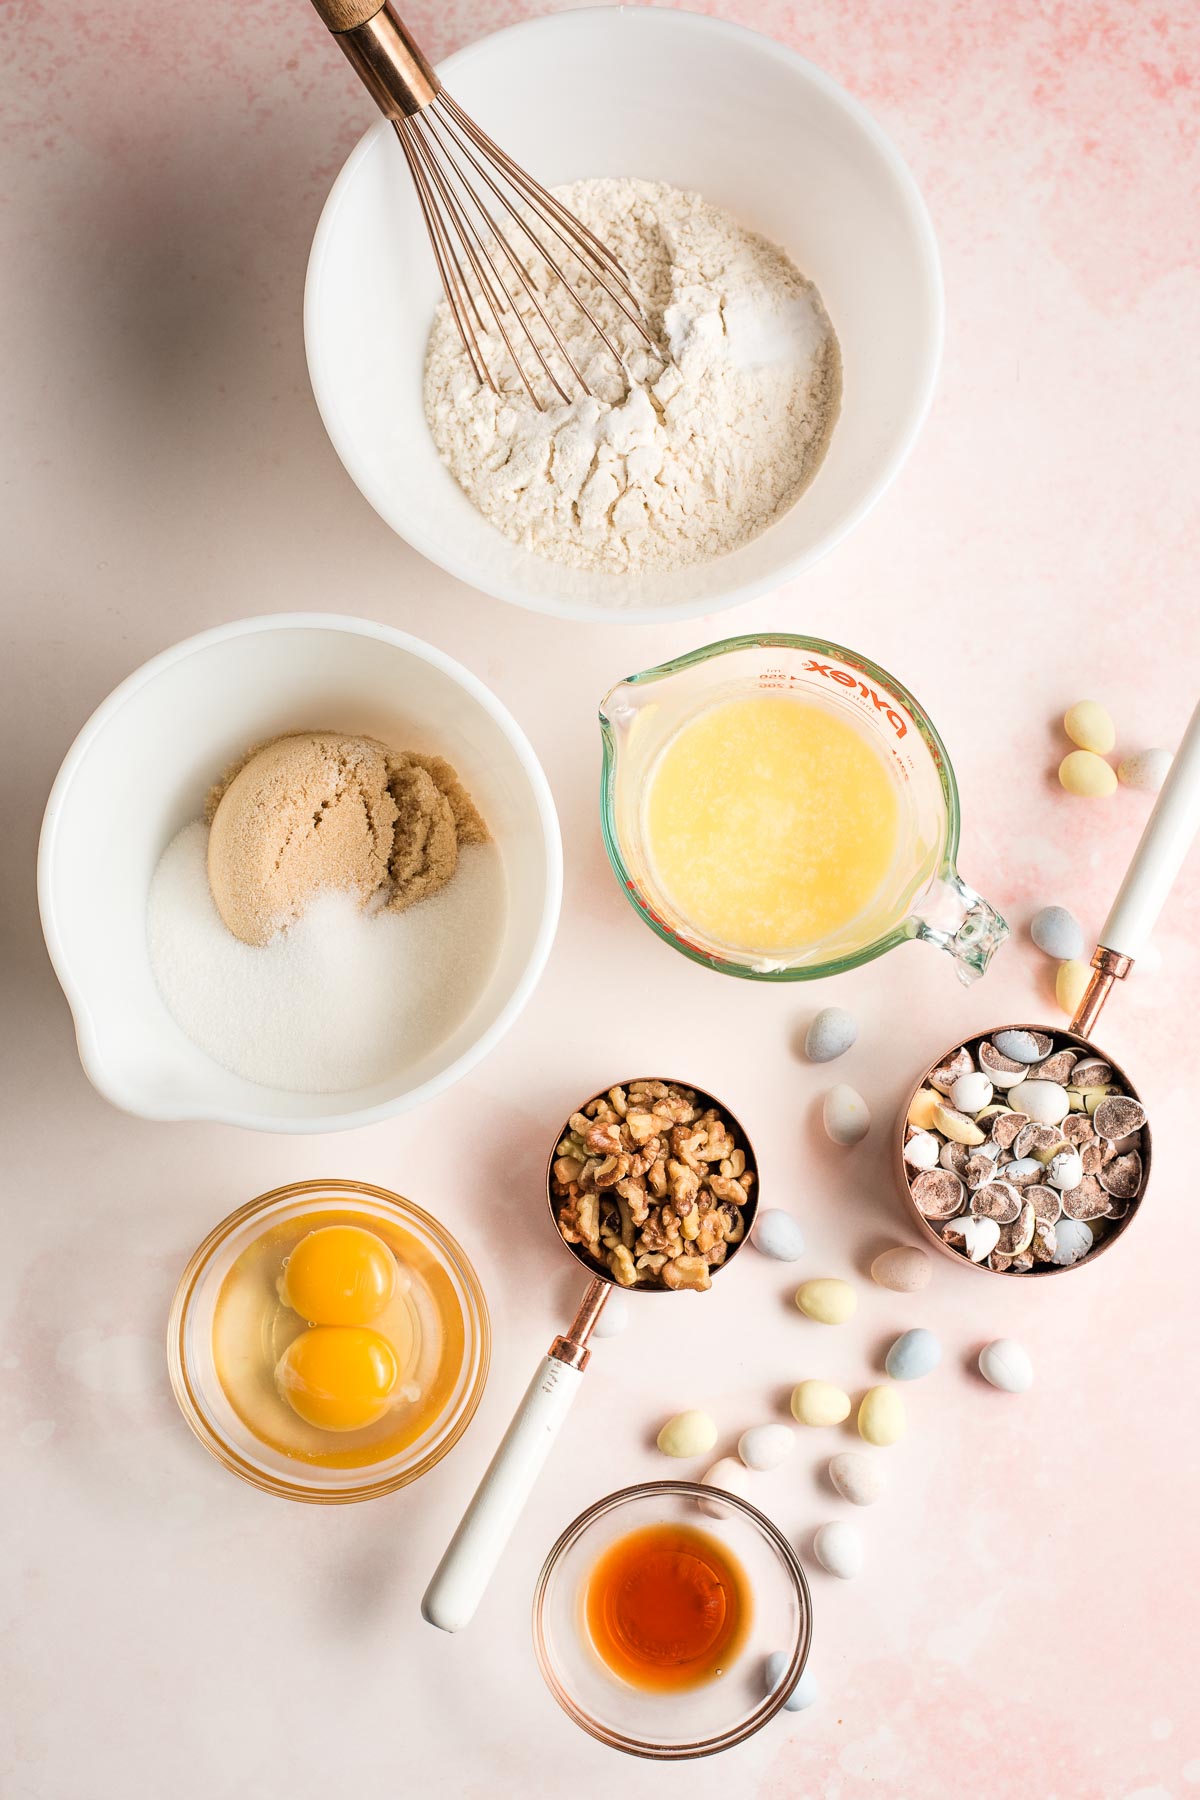 Ingredients for cookies shown in bowls--flour, sugars, eggs, vanilla, butter, walnuts, and mini chocolate eggs.